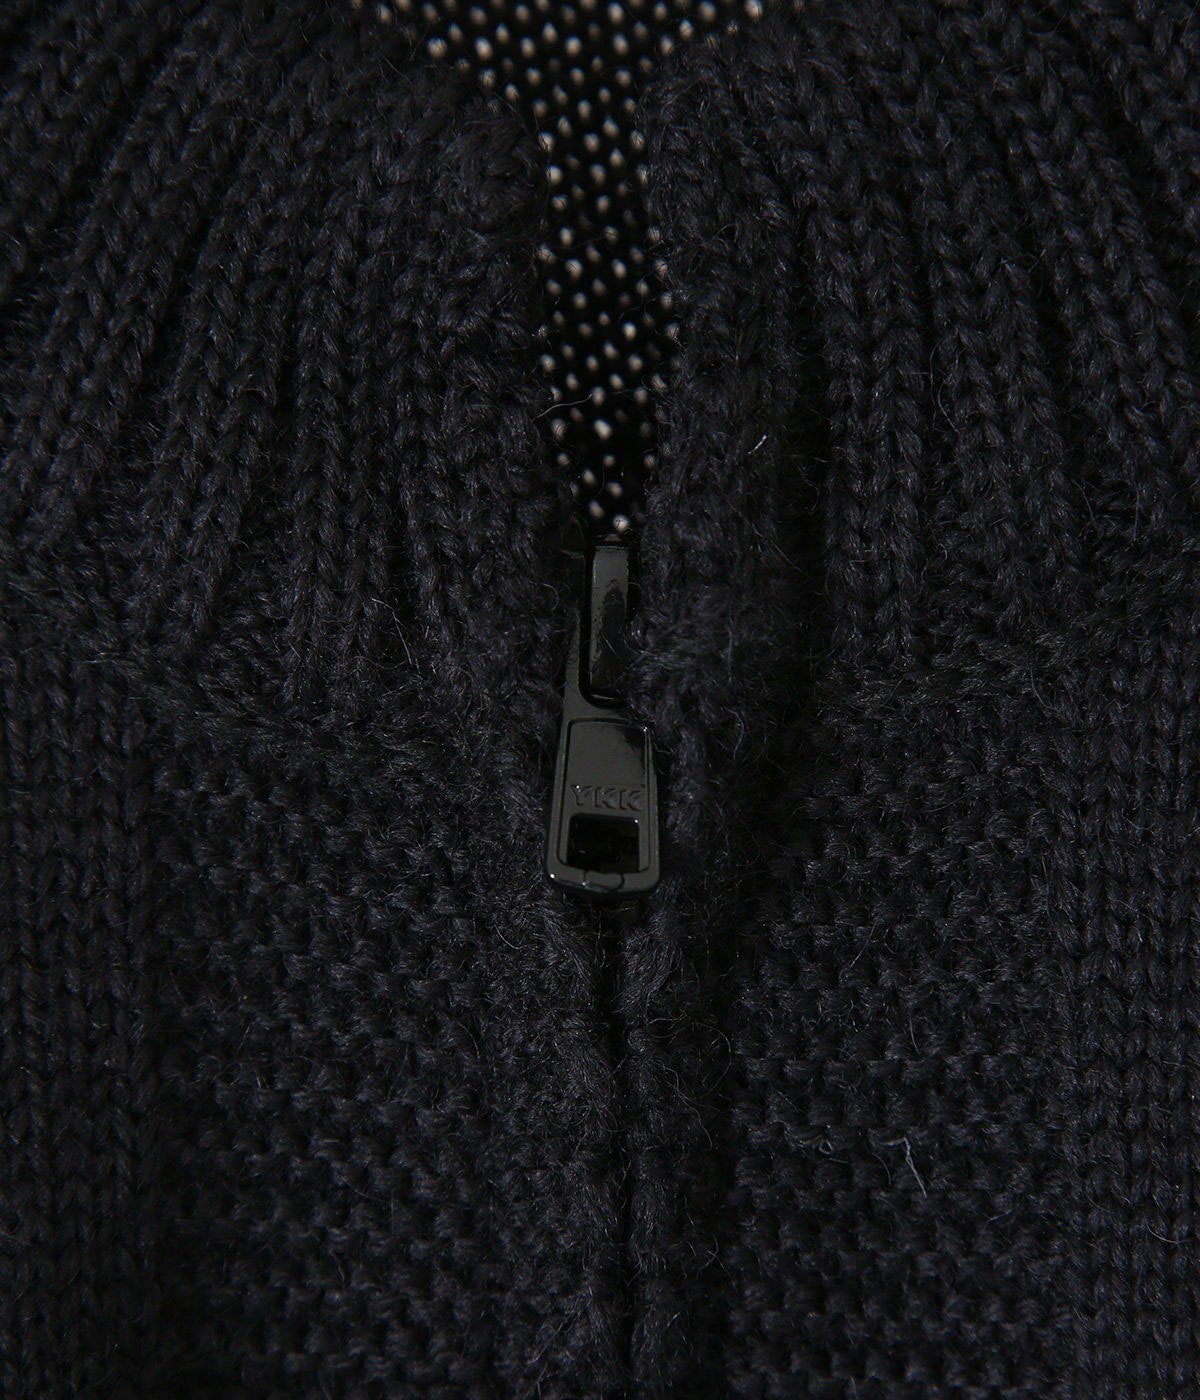 TRADITIONAL GUERNSEY ZIP CARDIGAN